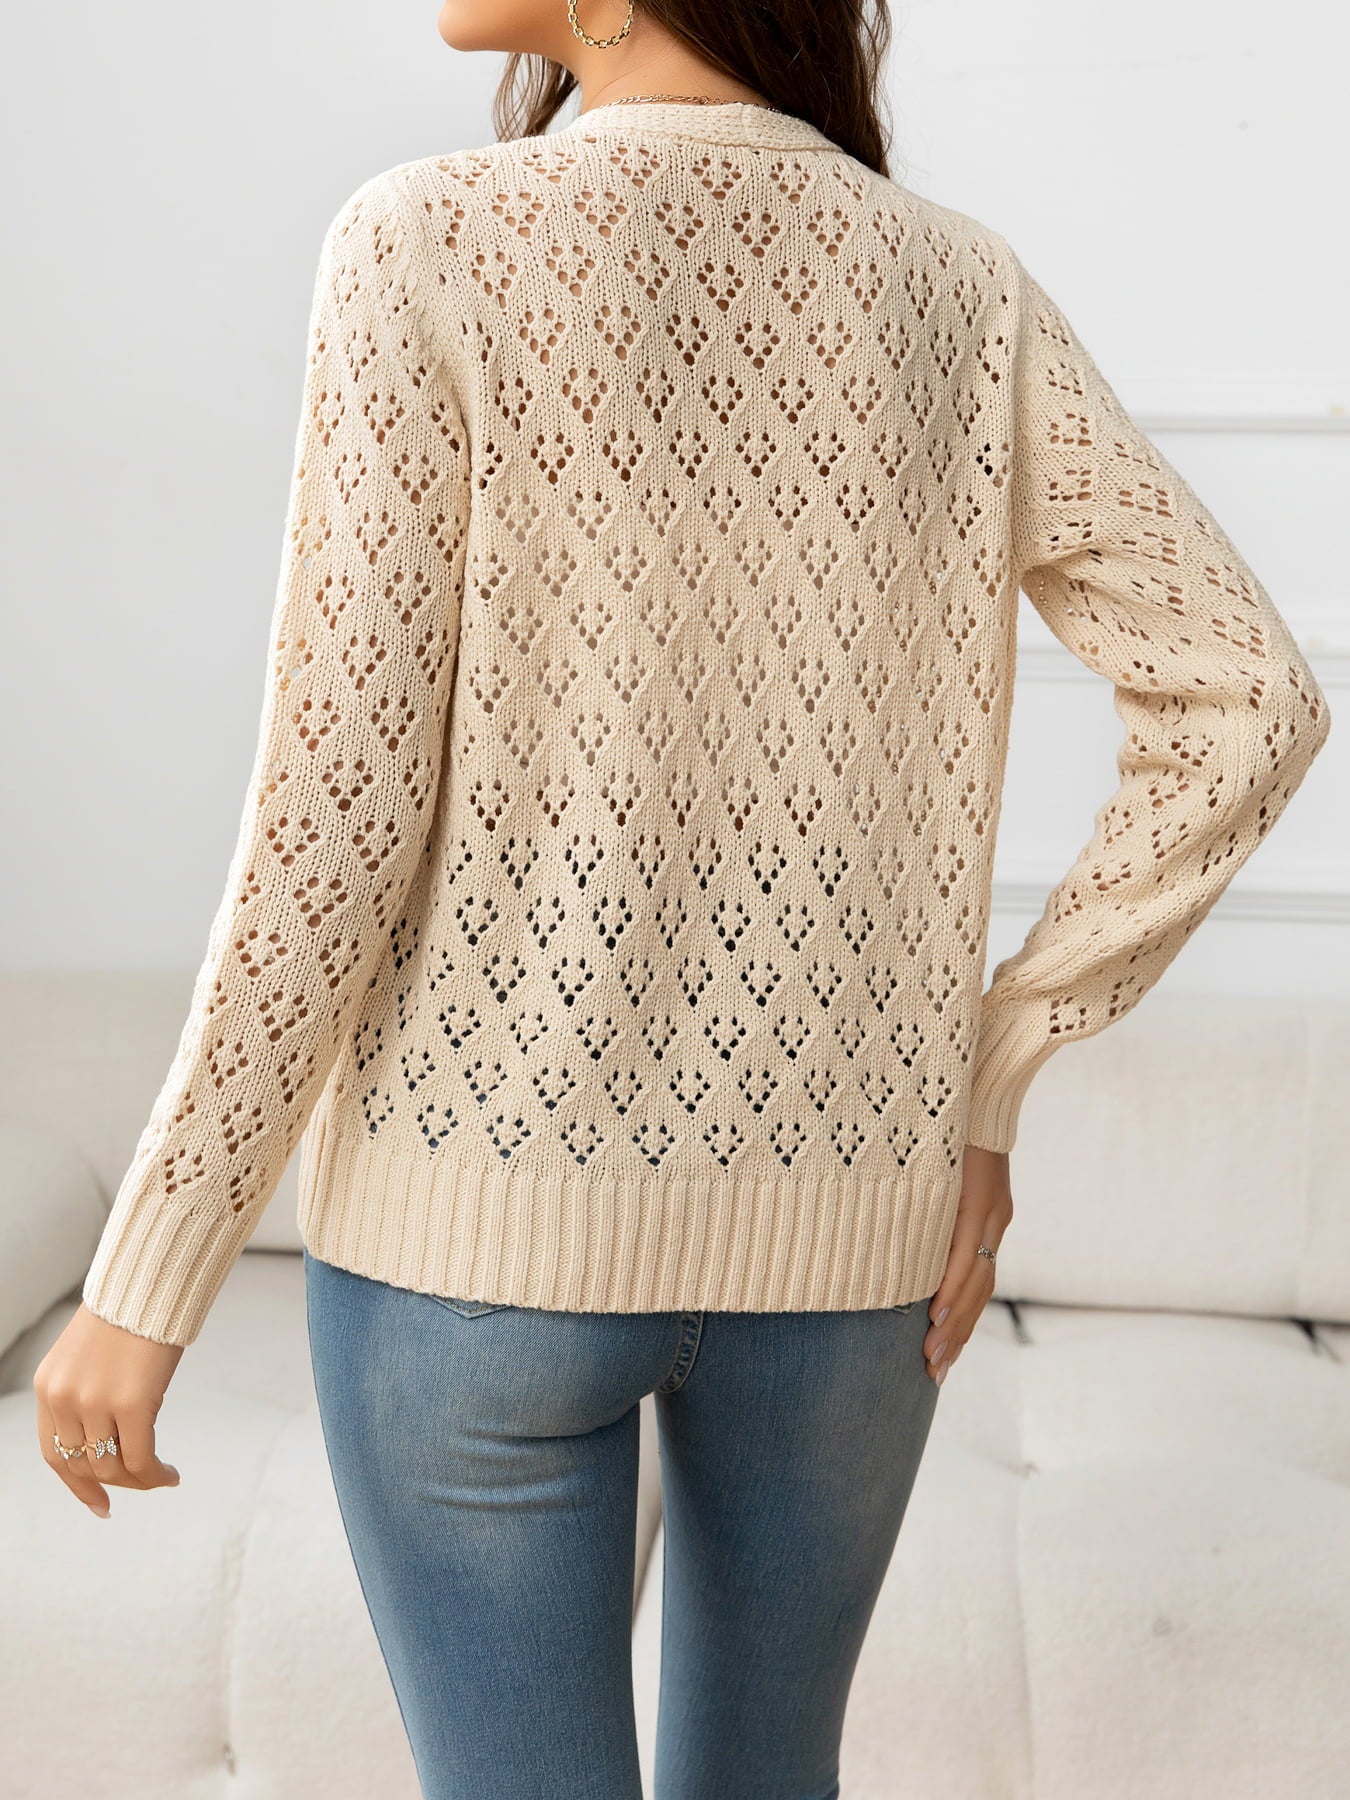 Beauteous Openwork V-Neck Buttoned Knit Top